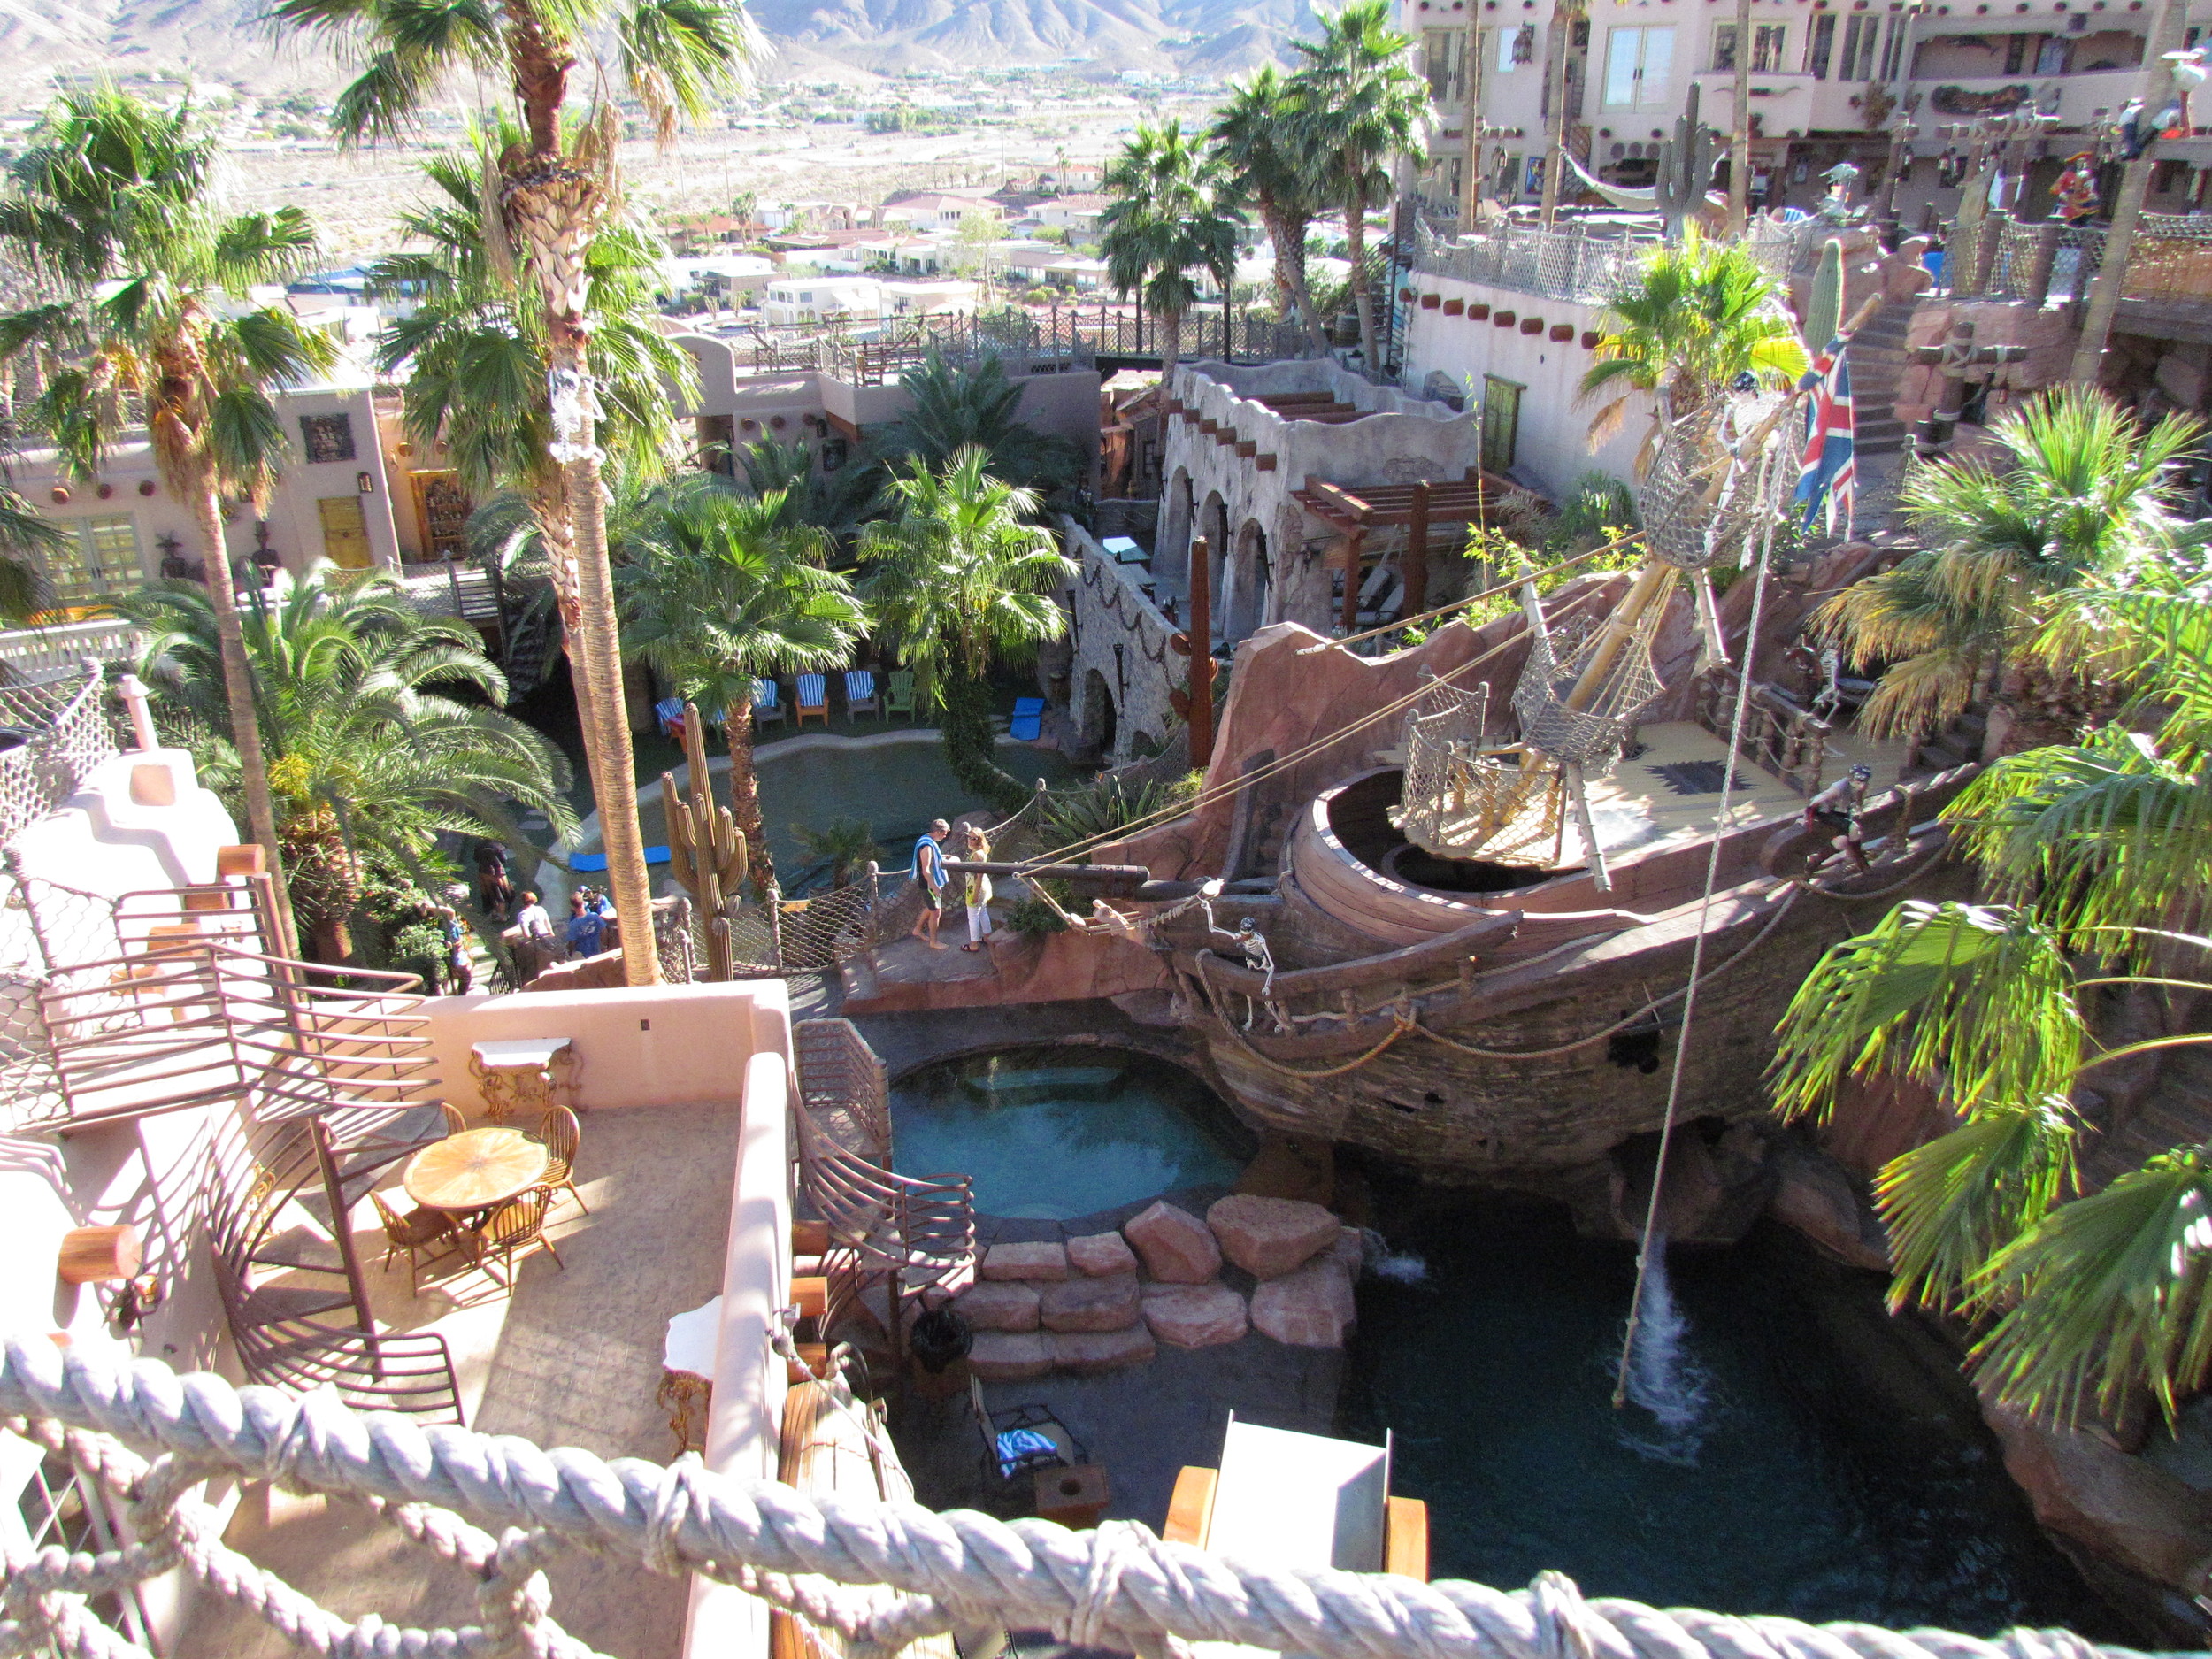 Here is a great overview of the central part of Pirate´s Cove